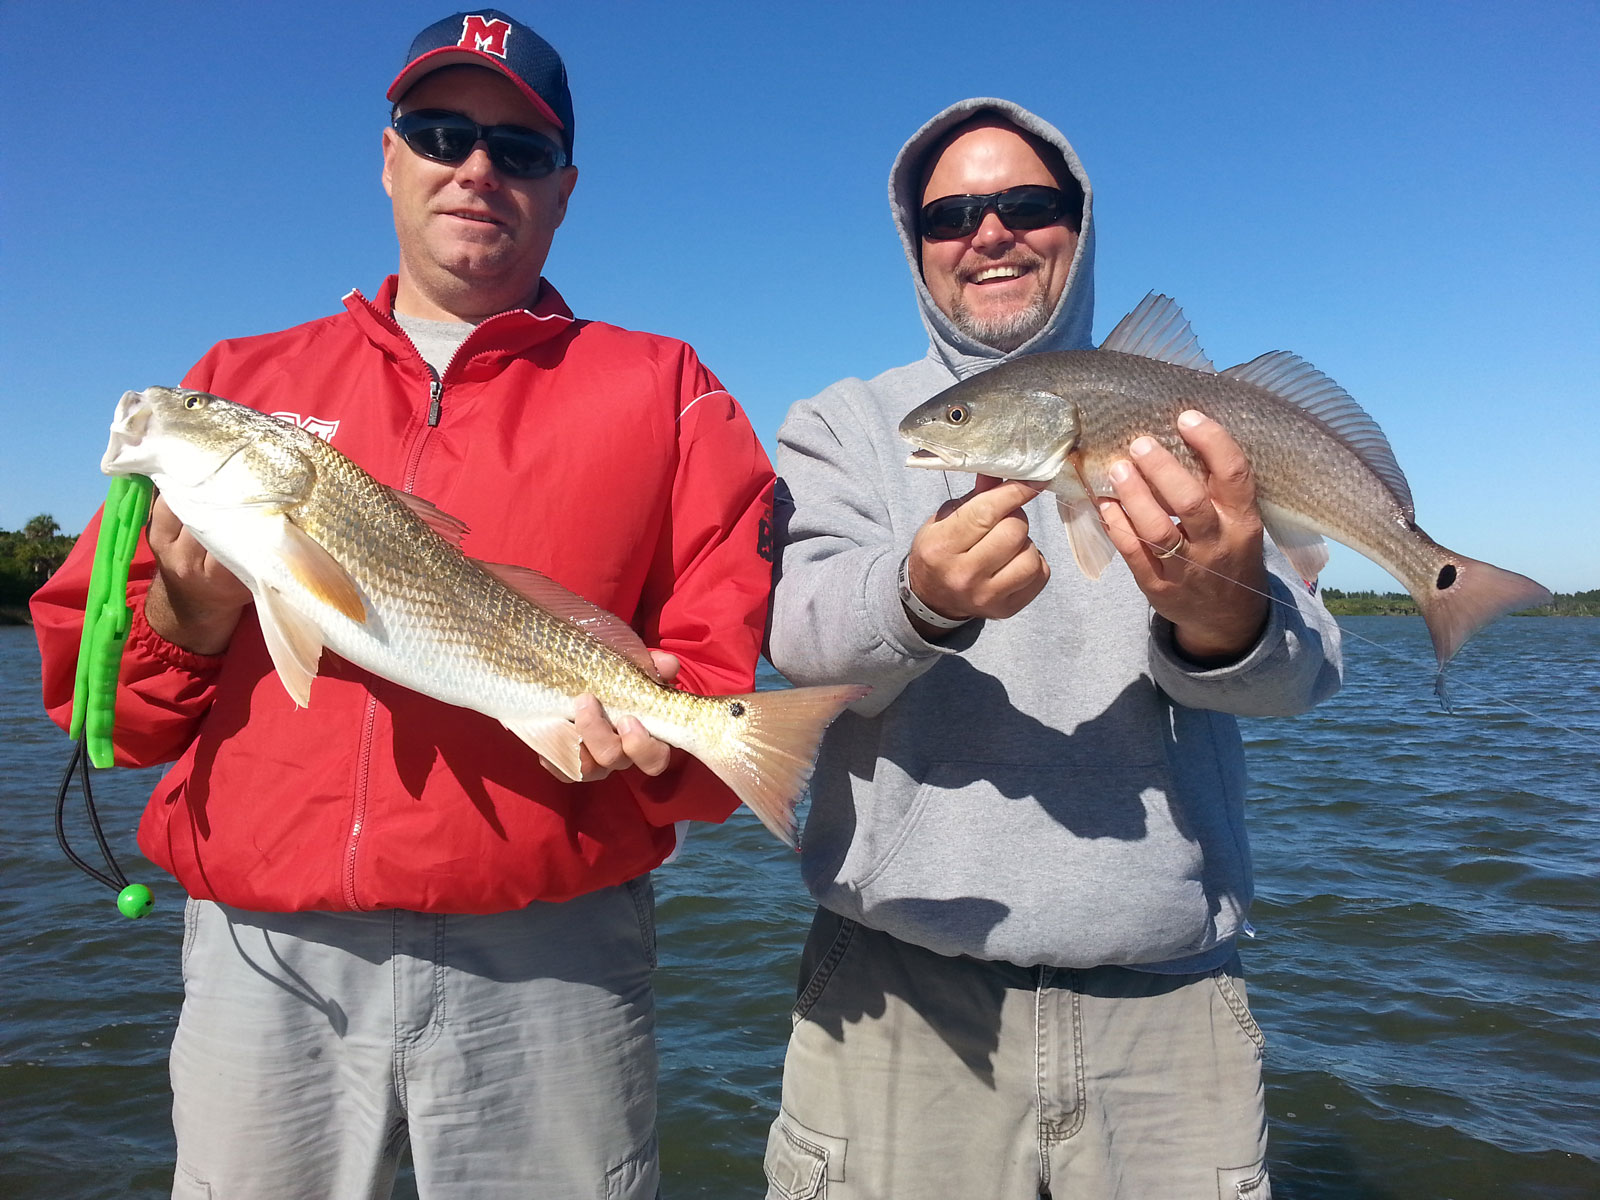 brother-redfish-smiling